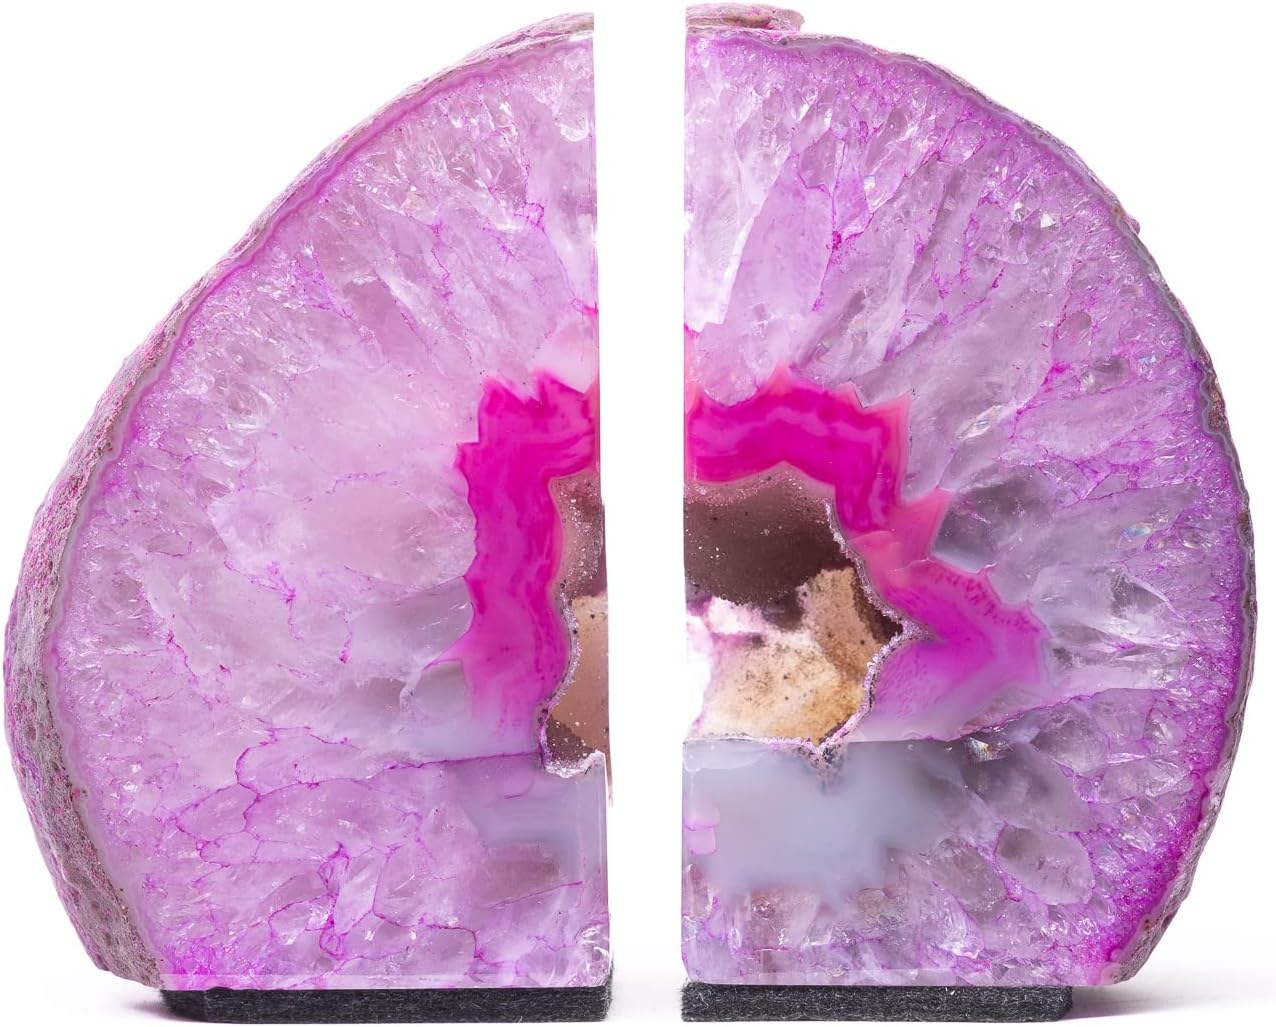 Agate Bookend with Felt Bottom Plus Includes Bonus Minerals (Agate 2 to 3 lb, Pink)